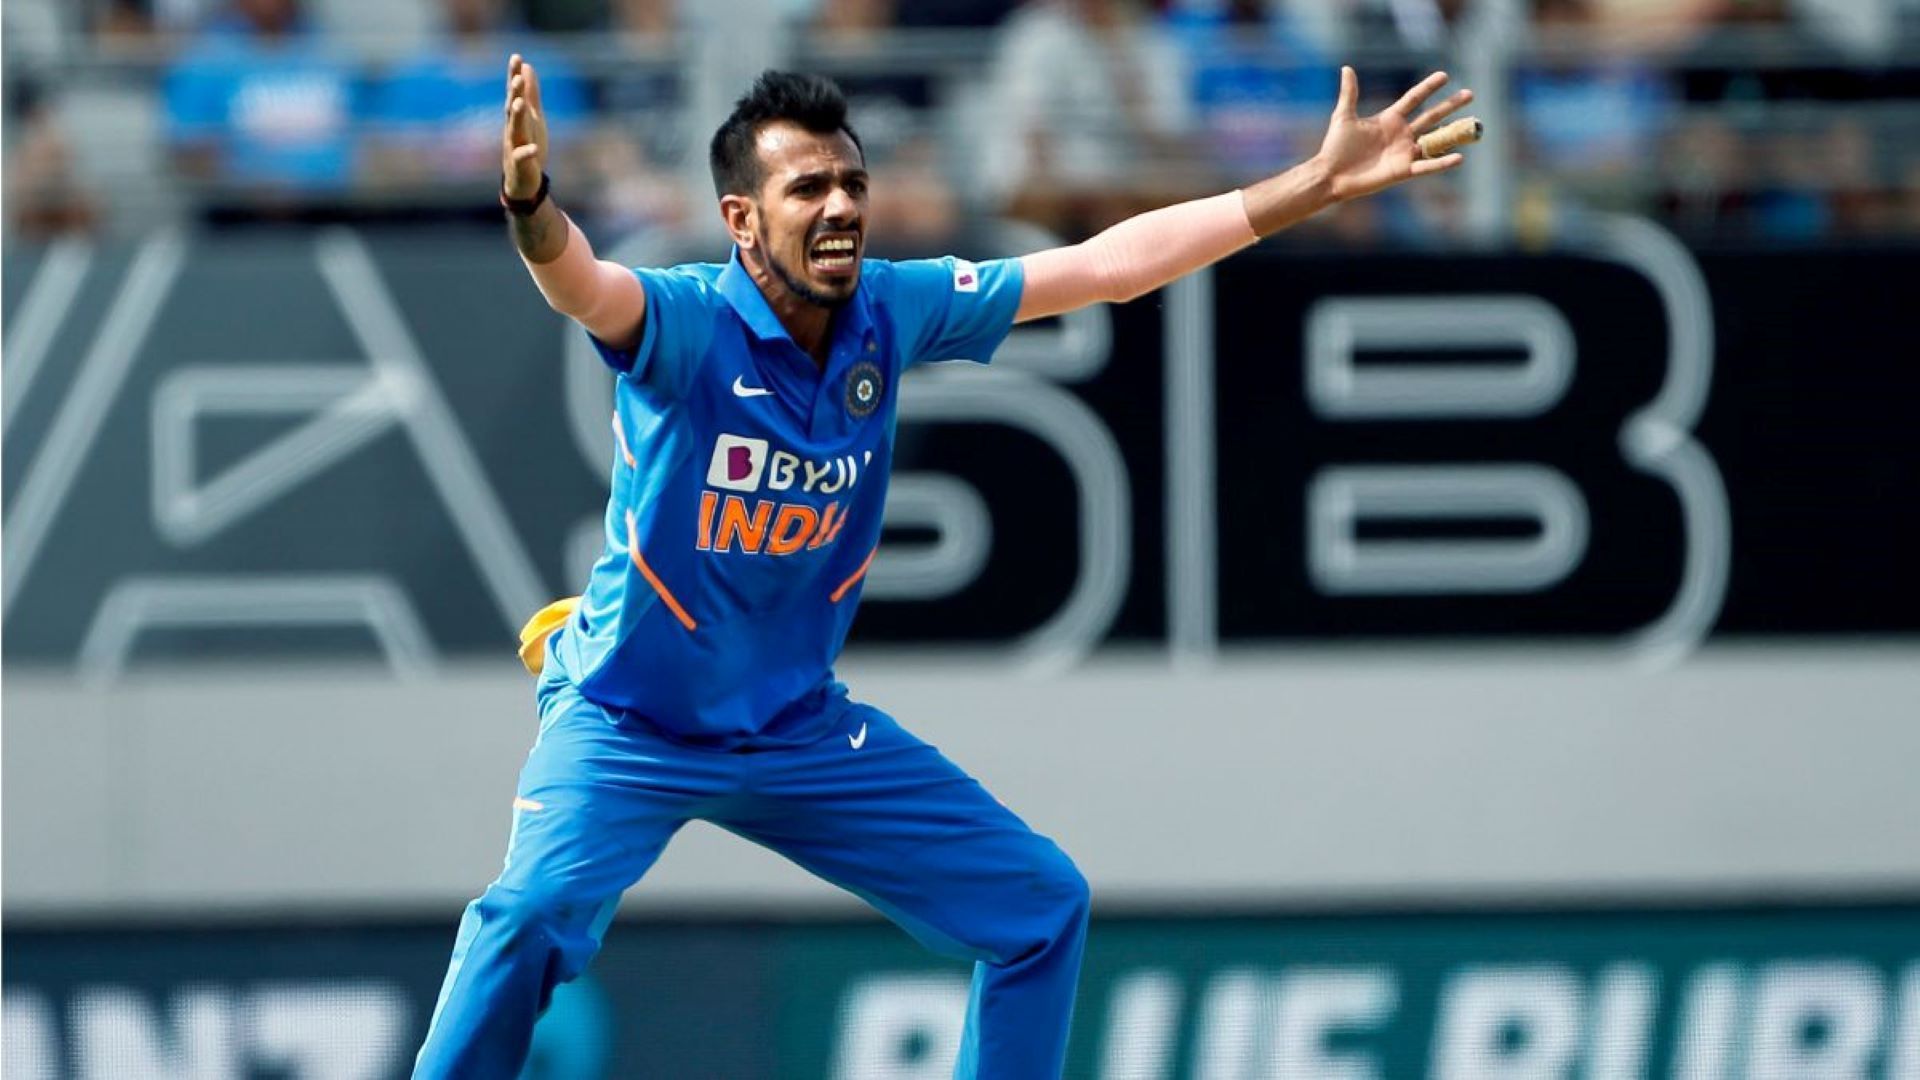 Chahal has been largely warming the benches in ODIs this year